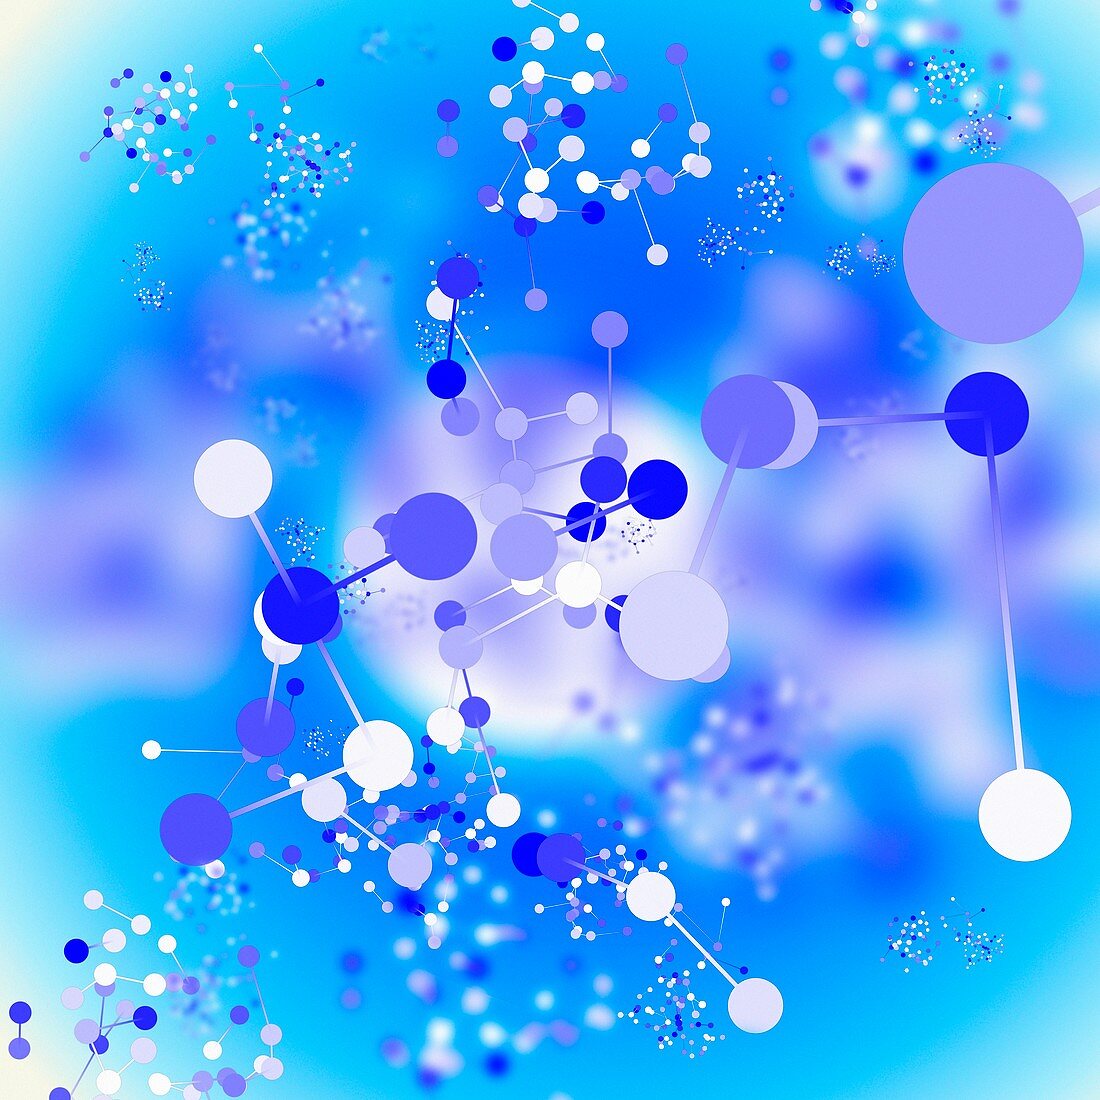 Blue and white molecules, illustration